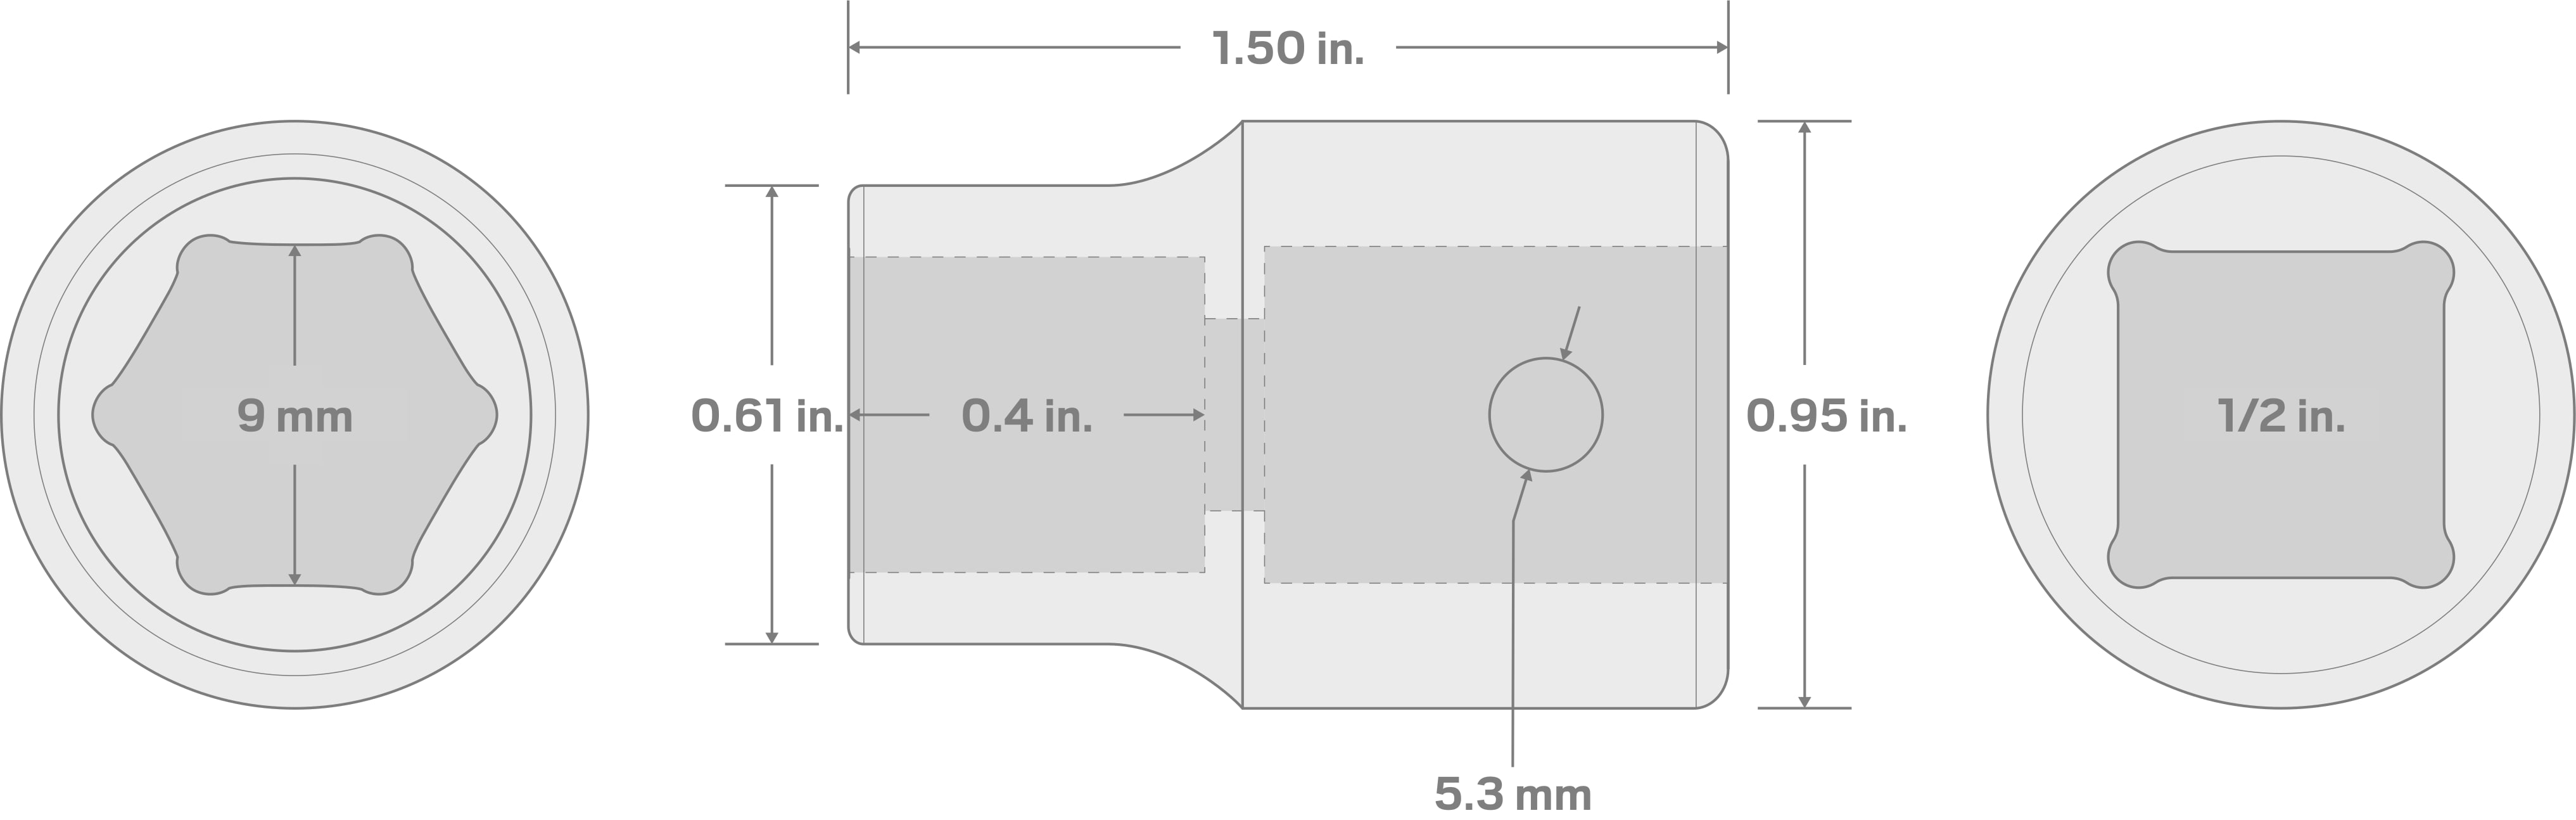 Specs for 1/2 Inch Drive x 9 mm 6-Point Impact Socket